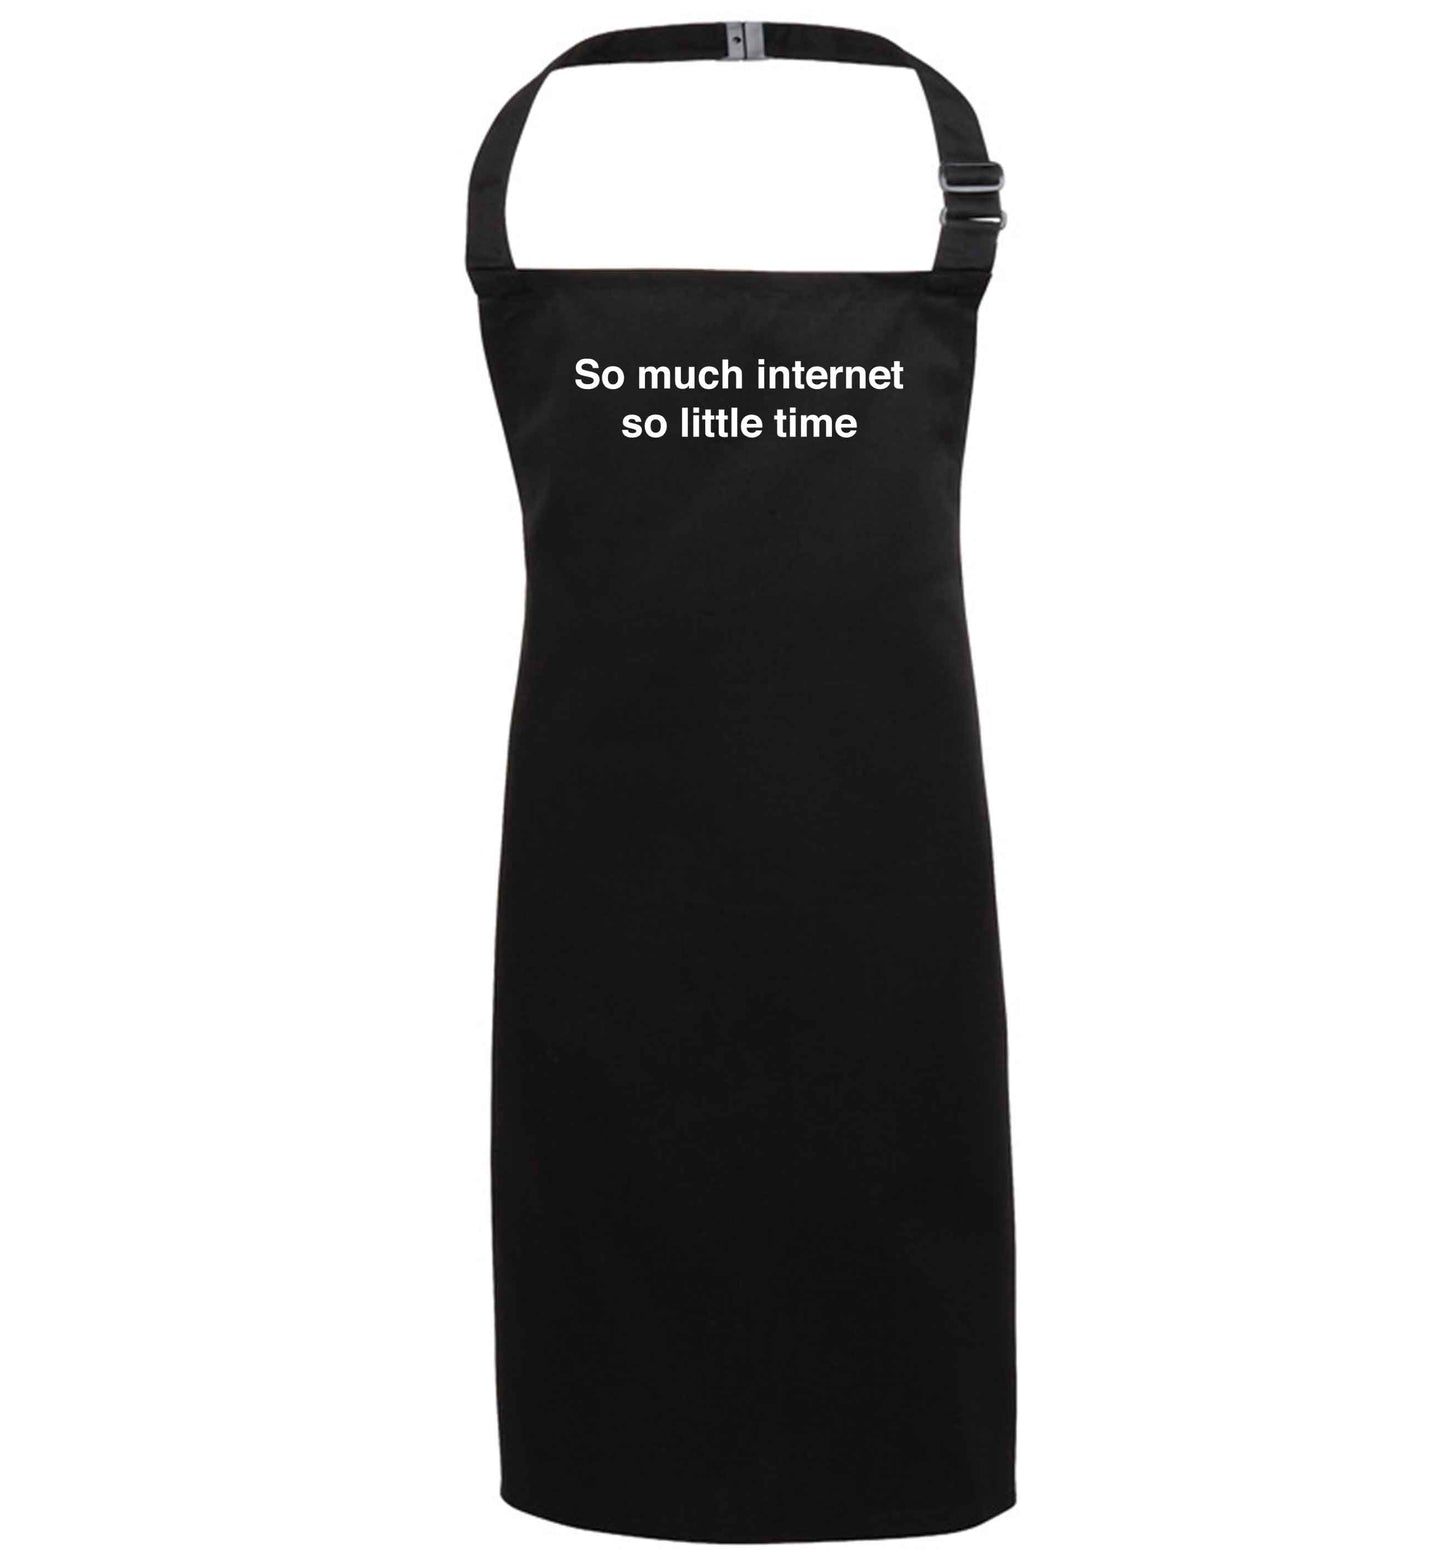 So much internet so little time black apron 7-10 years